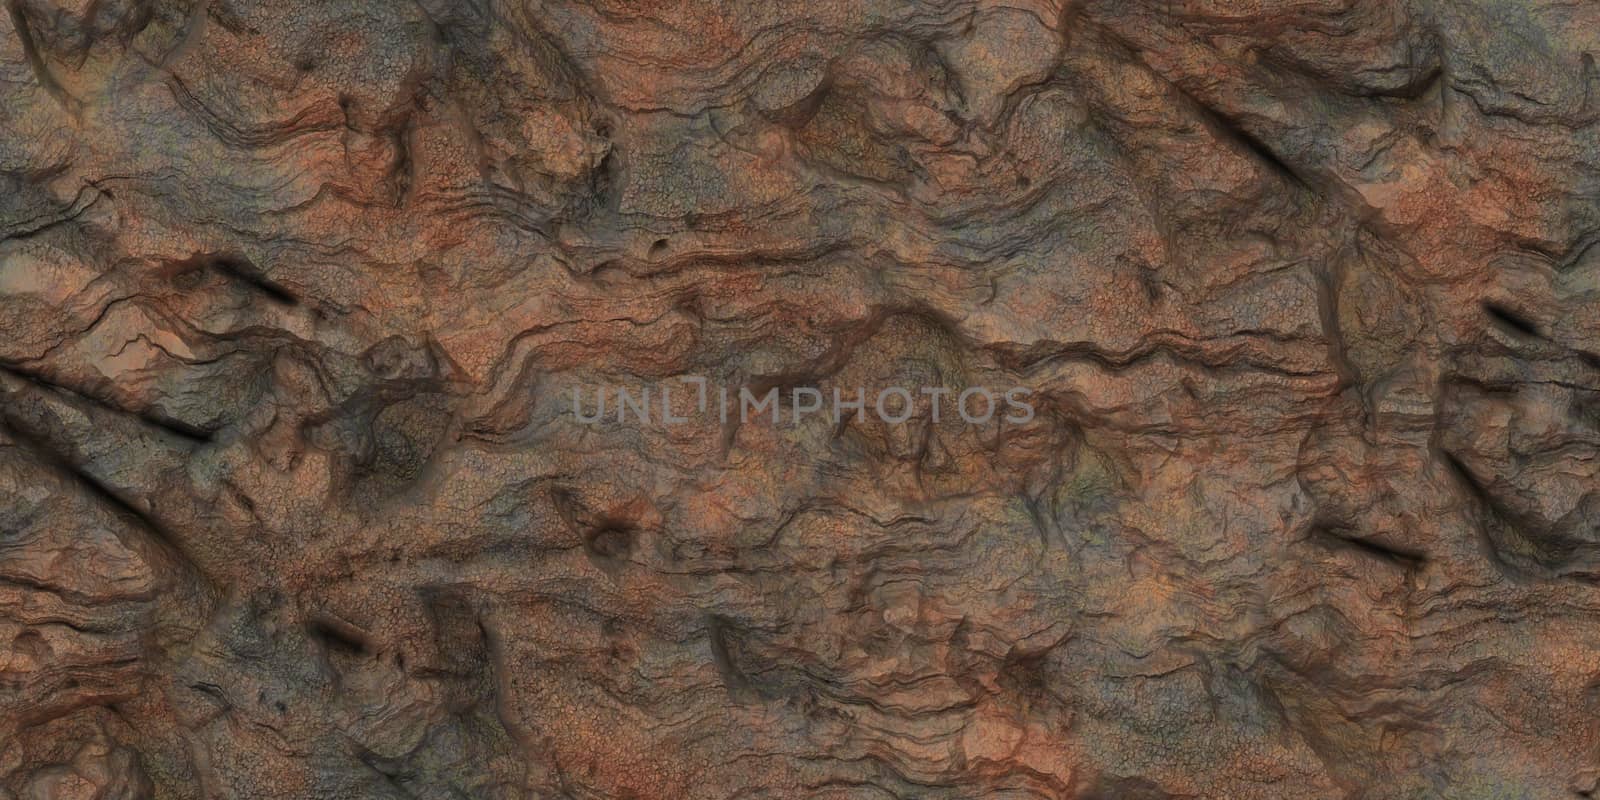 Nature Stone Texture With Detail Cracks. Rockies Rough Mineral Backdrop.